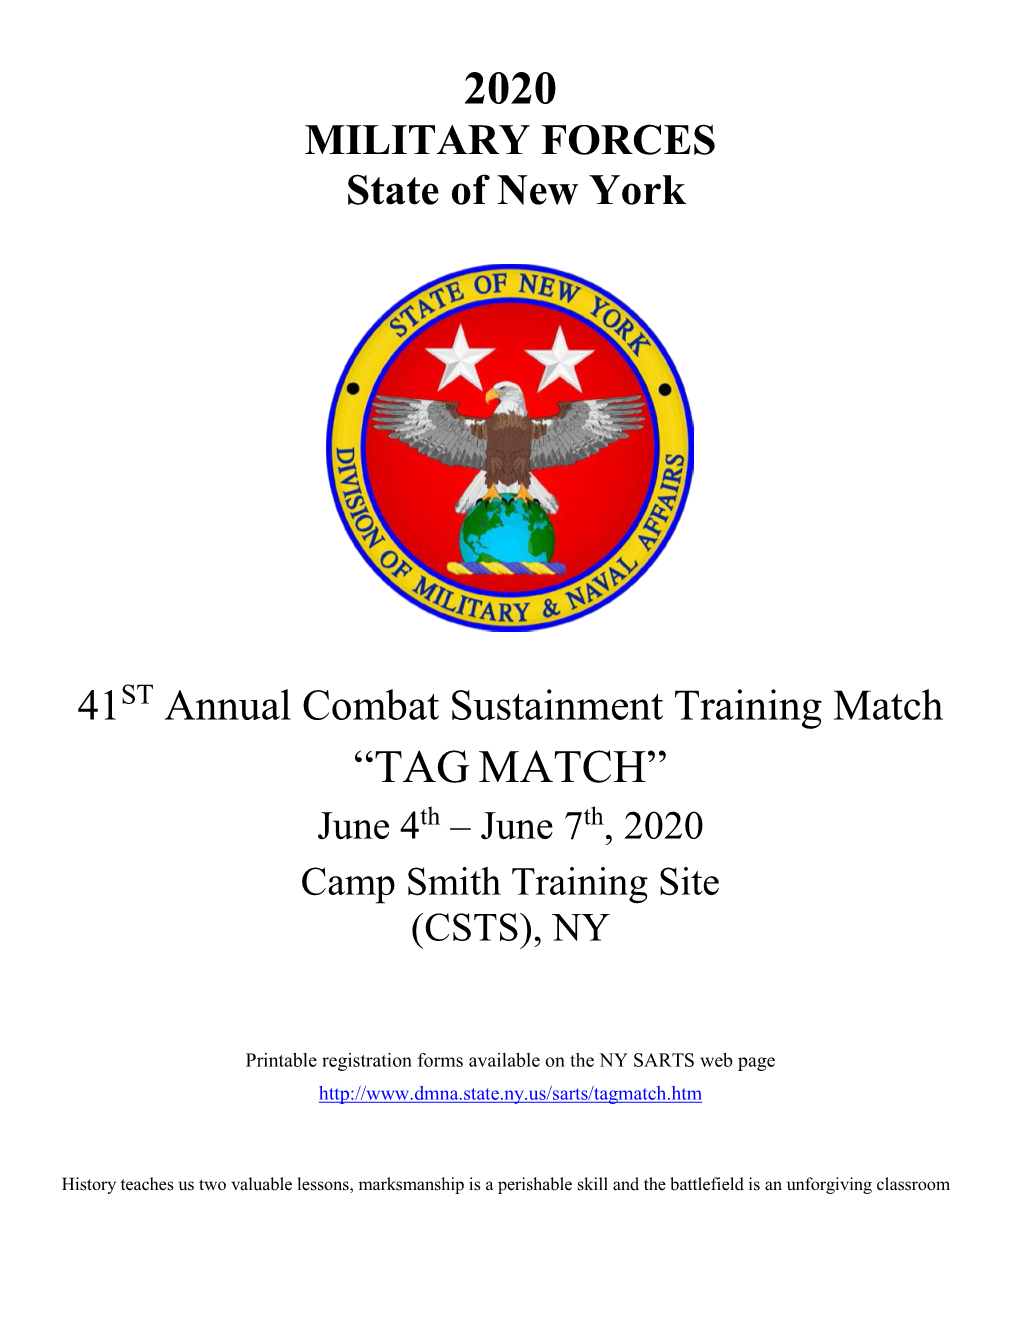 41St Annual TAG Match, June 4